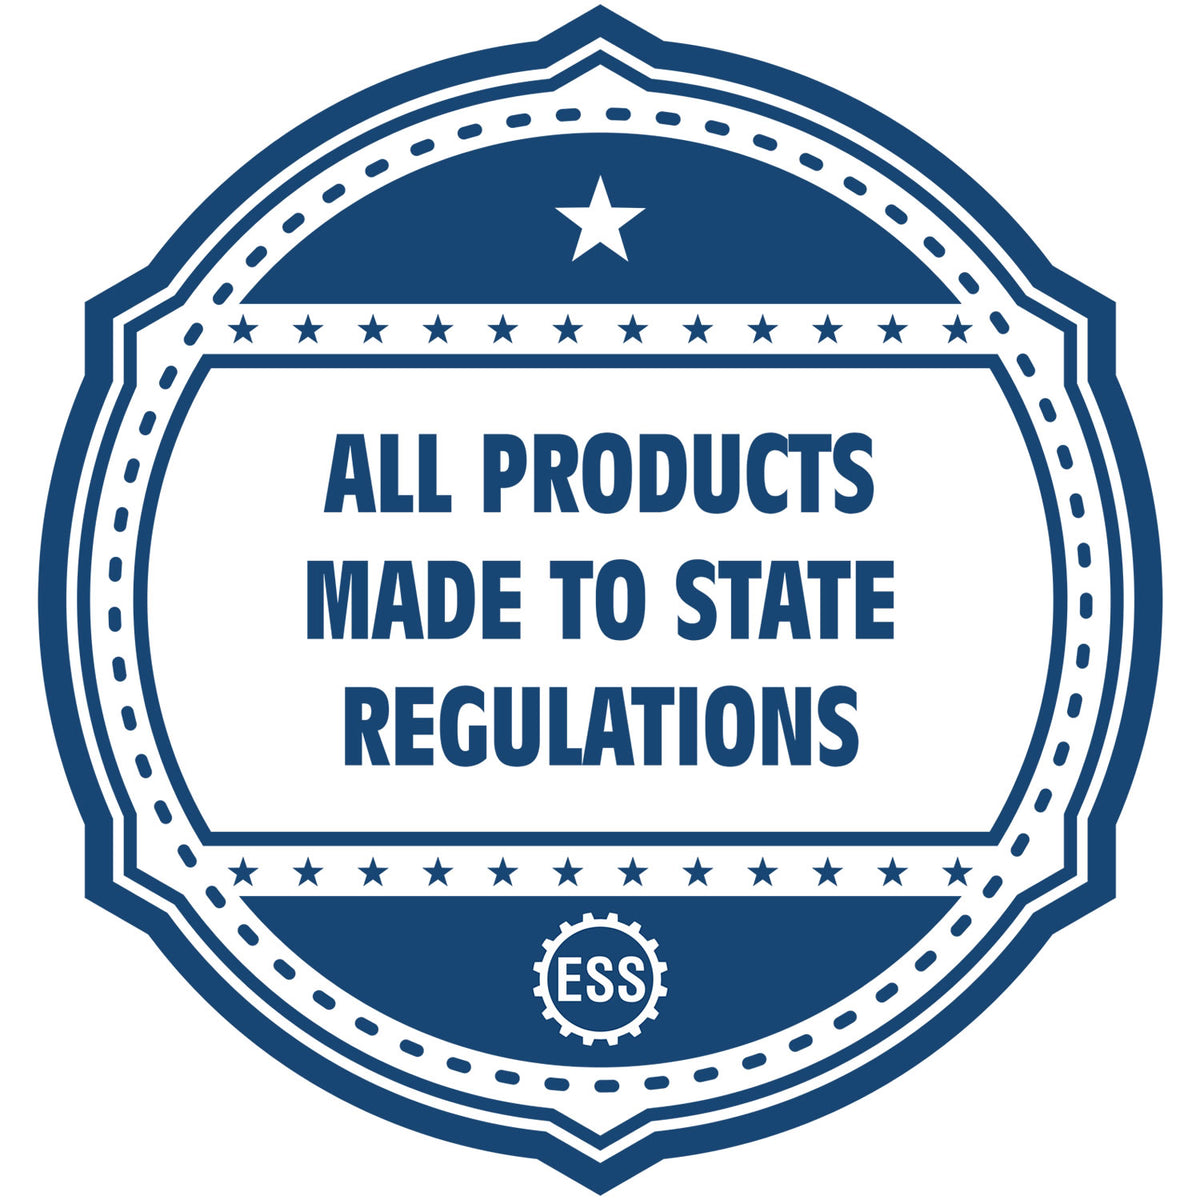 An icon or badge element for the Slim Pre-Inked Vermont Architect Seal Stamp showing that this product is made in compliance with state regulations.